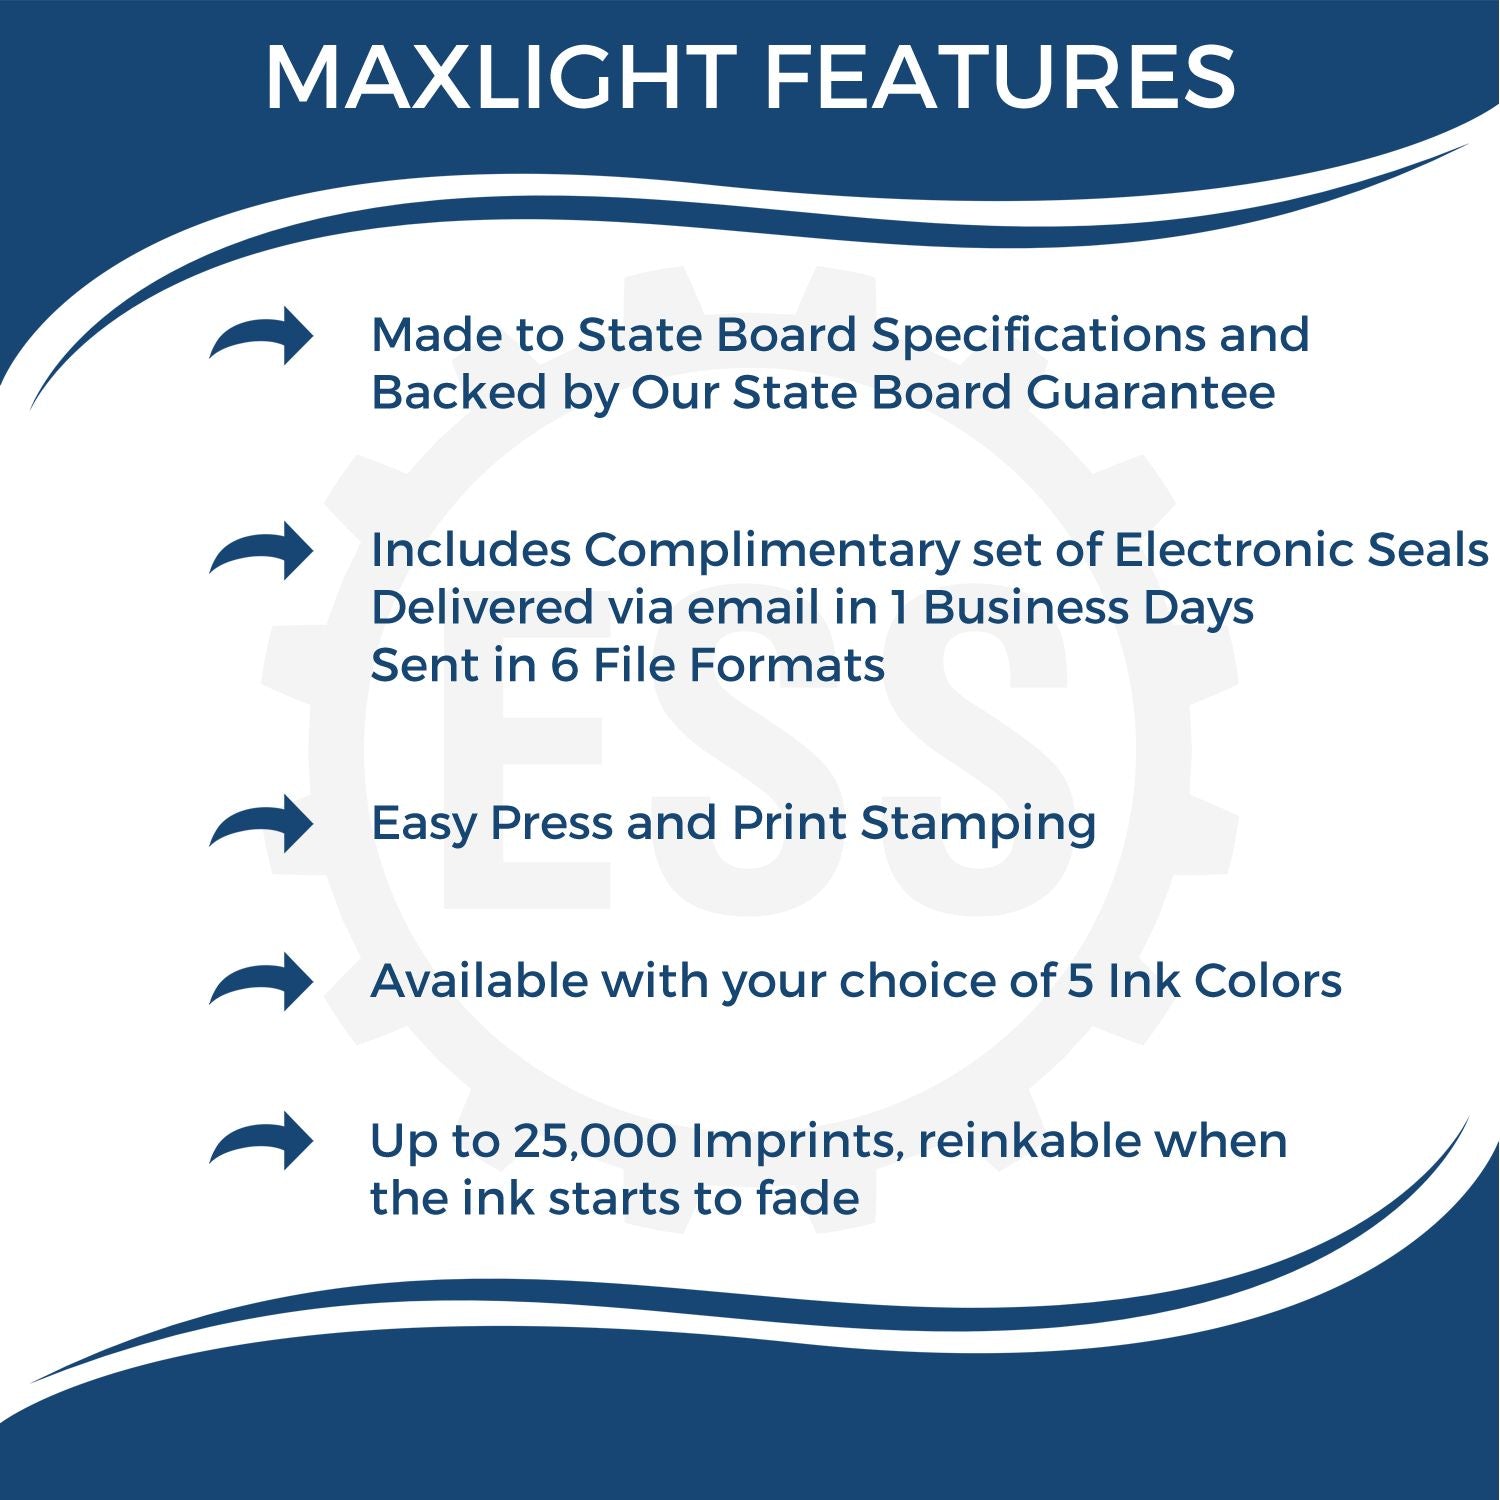 A picture of an infographic highlighting the selling points for the Premium MaxLight Pre-Inked District of Columbia Engineering Stamp